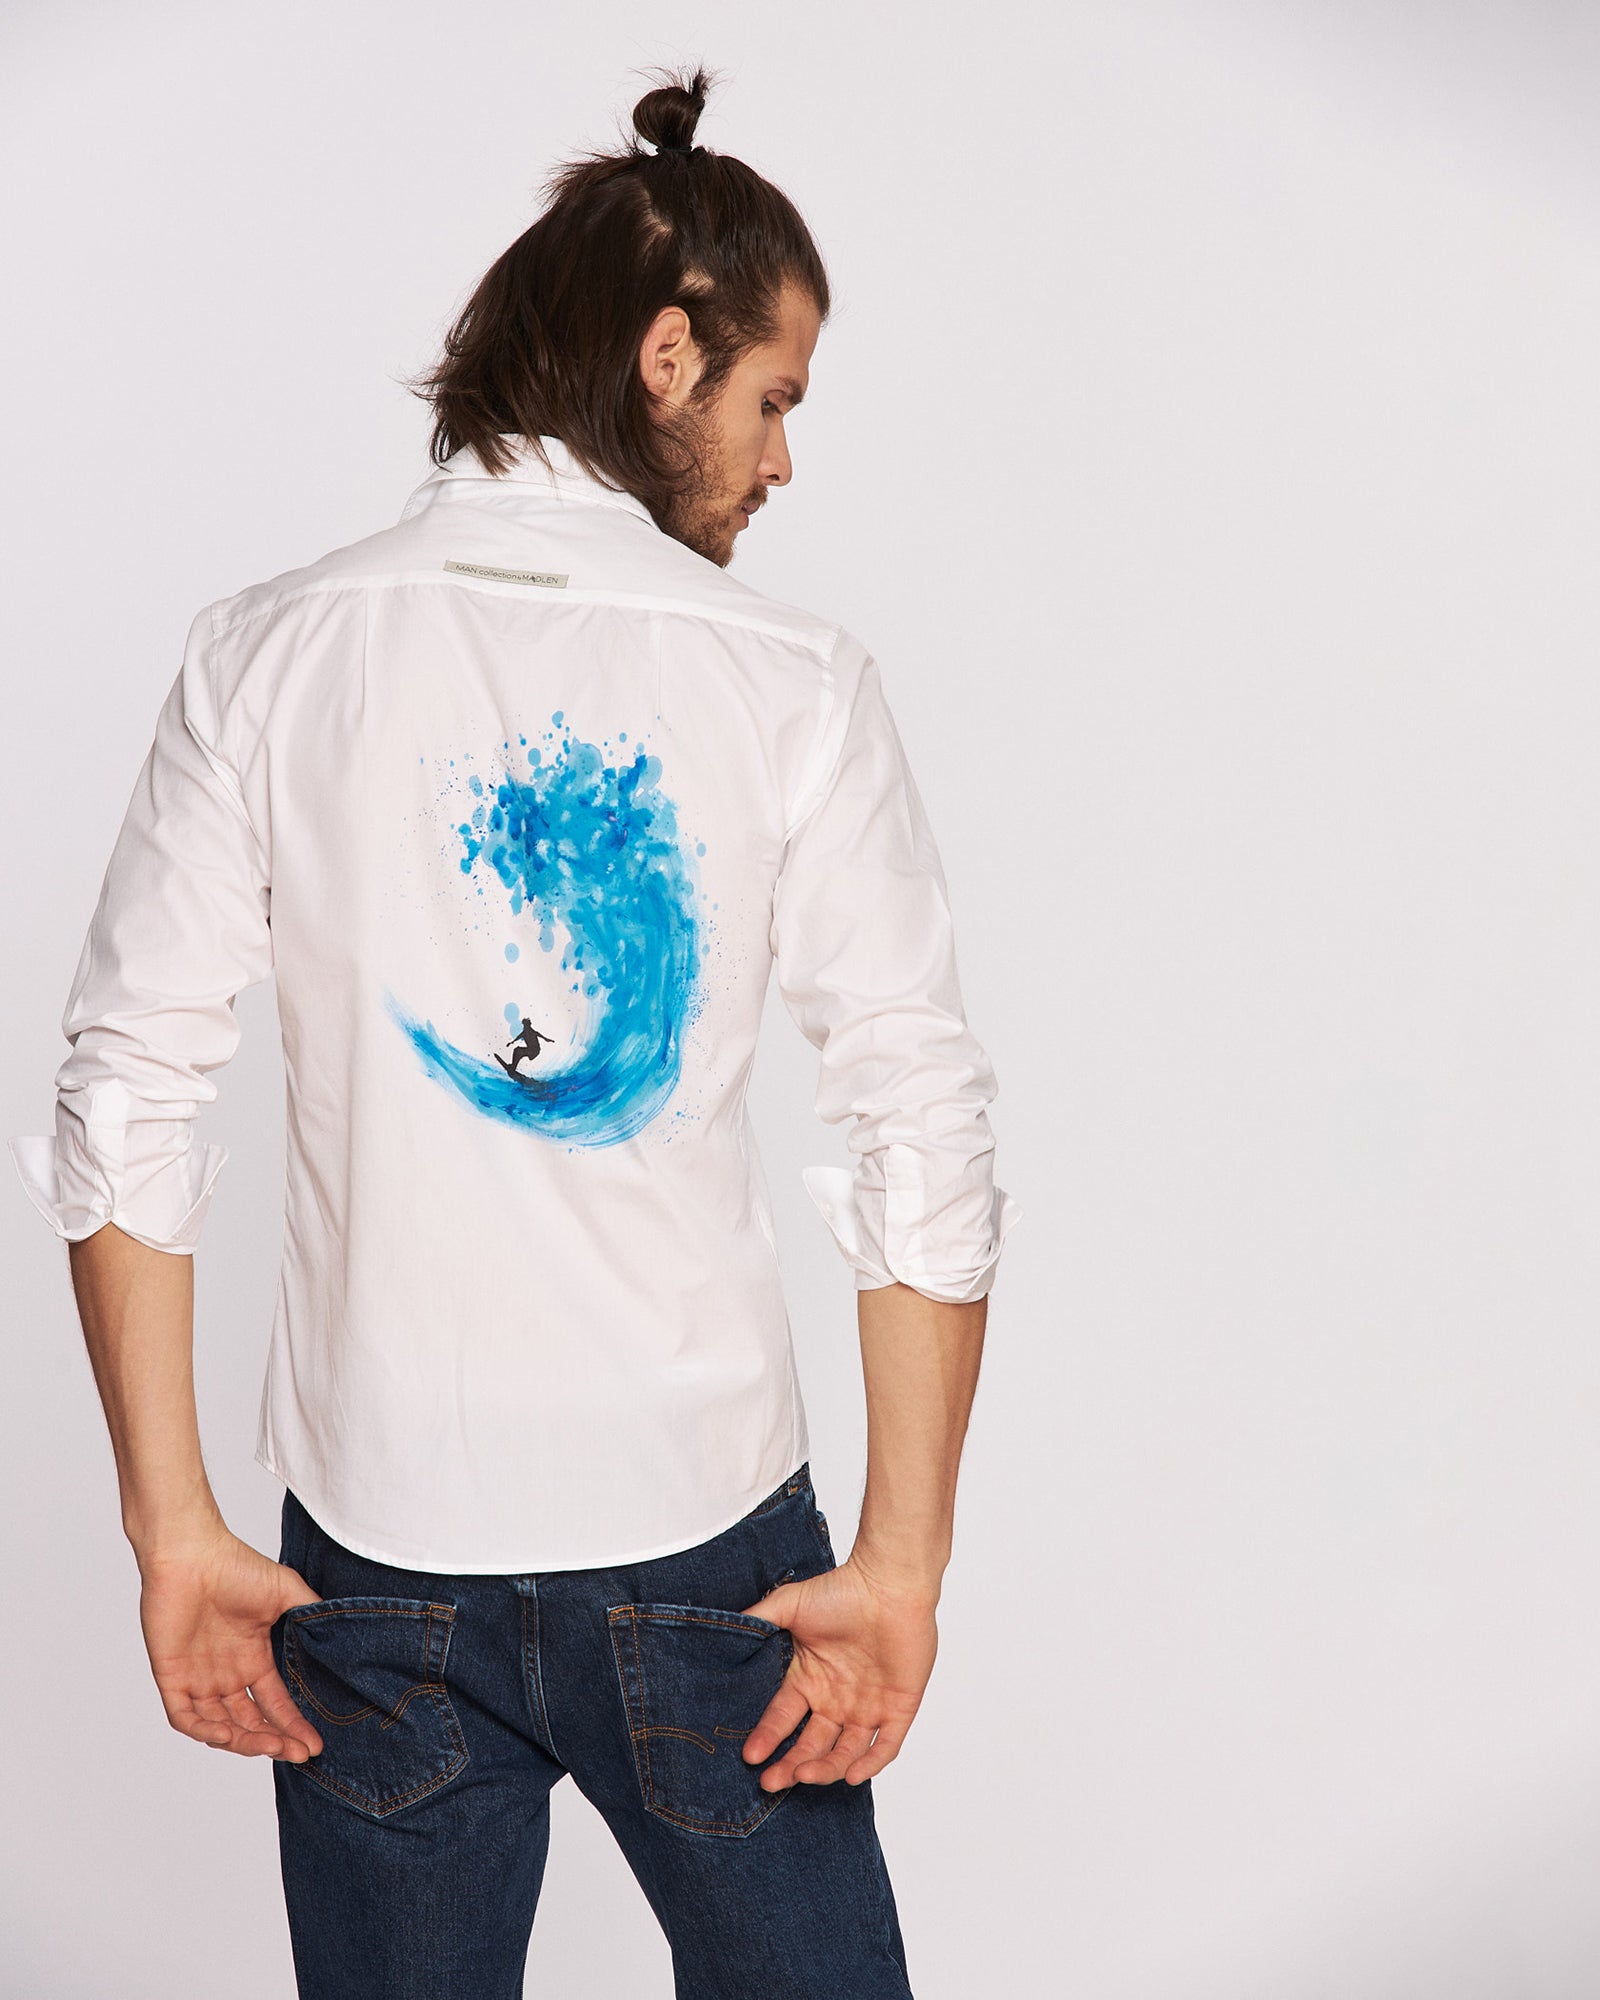 "Catch the wave" hand painted men's shirt